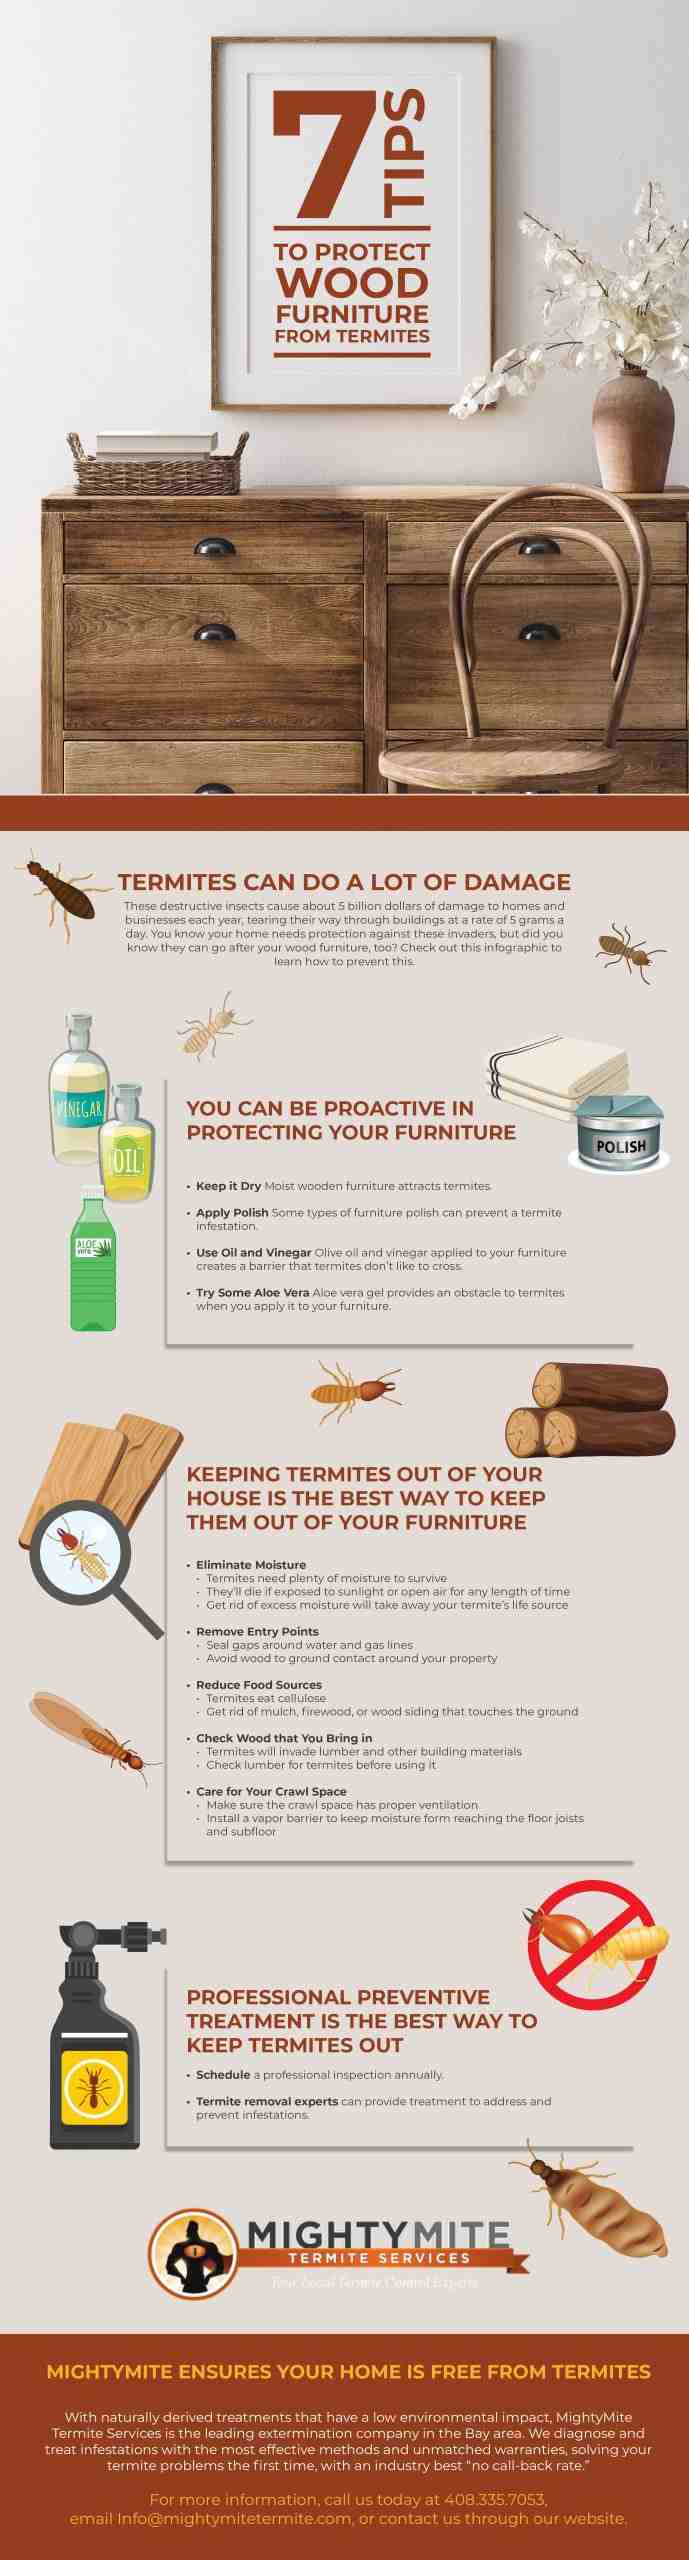 7 tips to protect wood from termites infographic